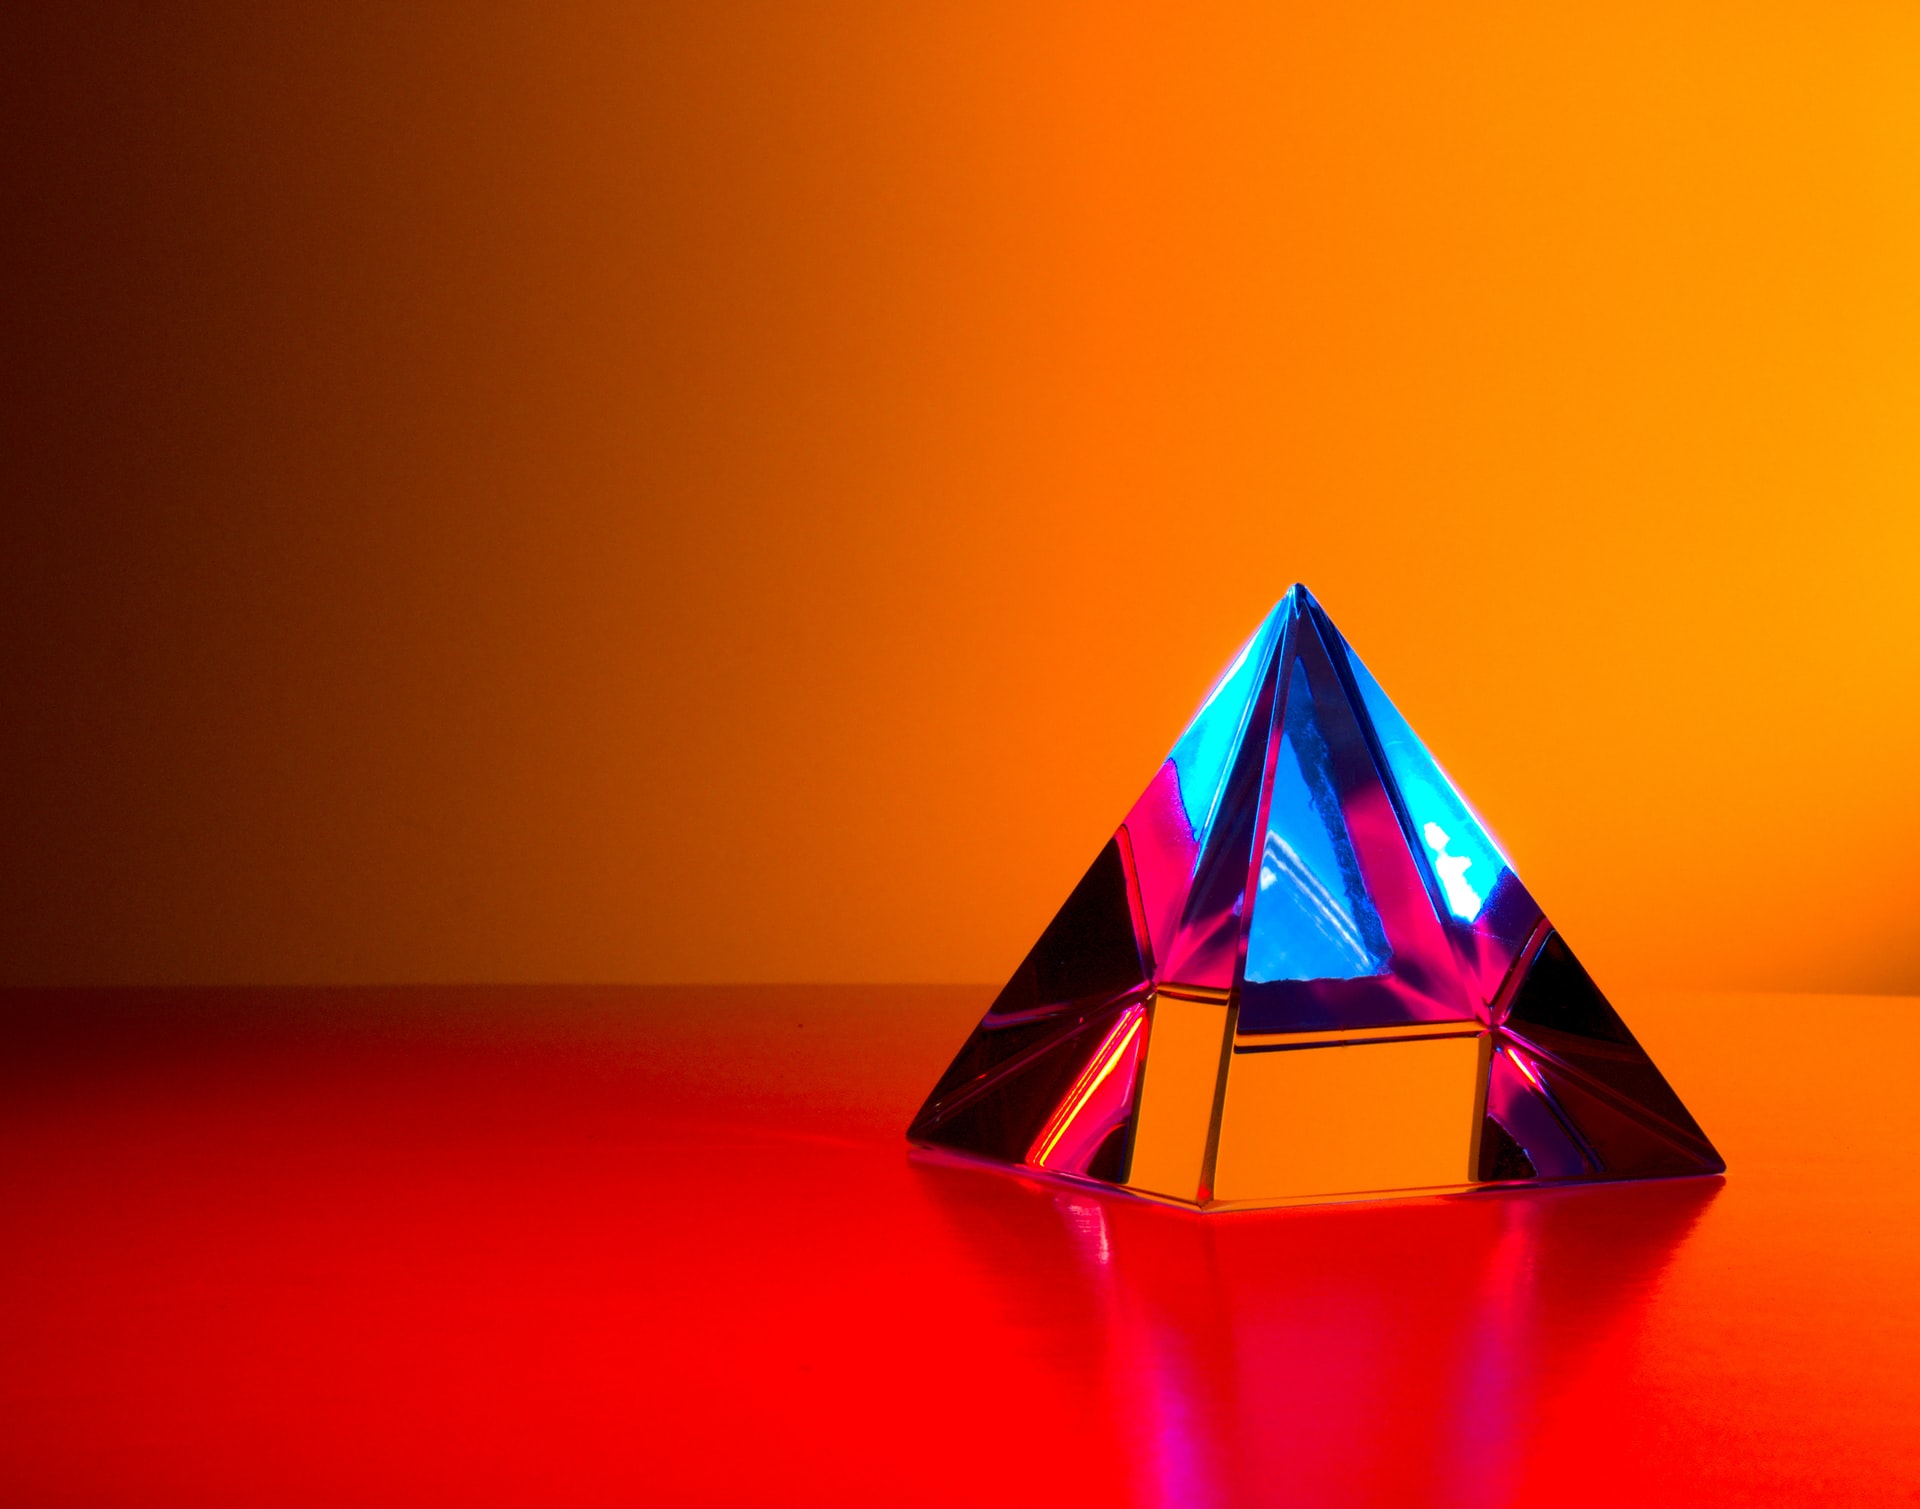 A colourful glass prism against a vibrant orange background